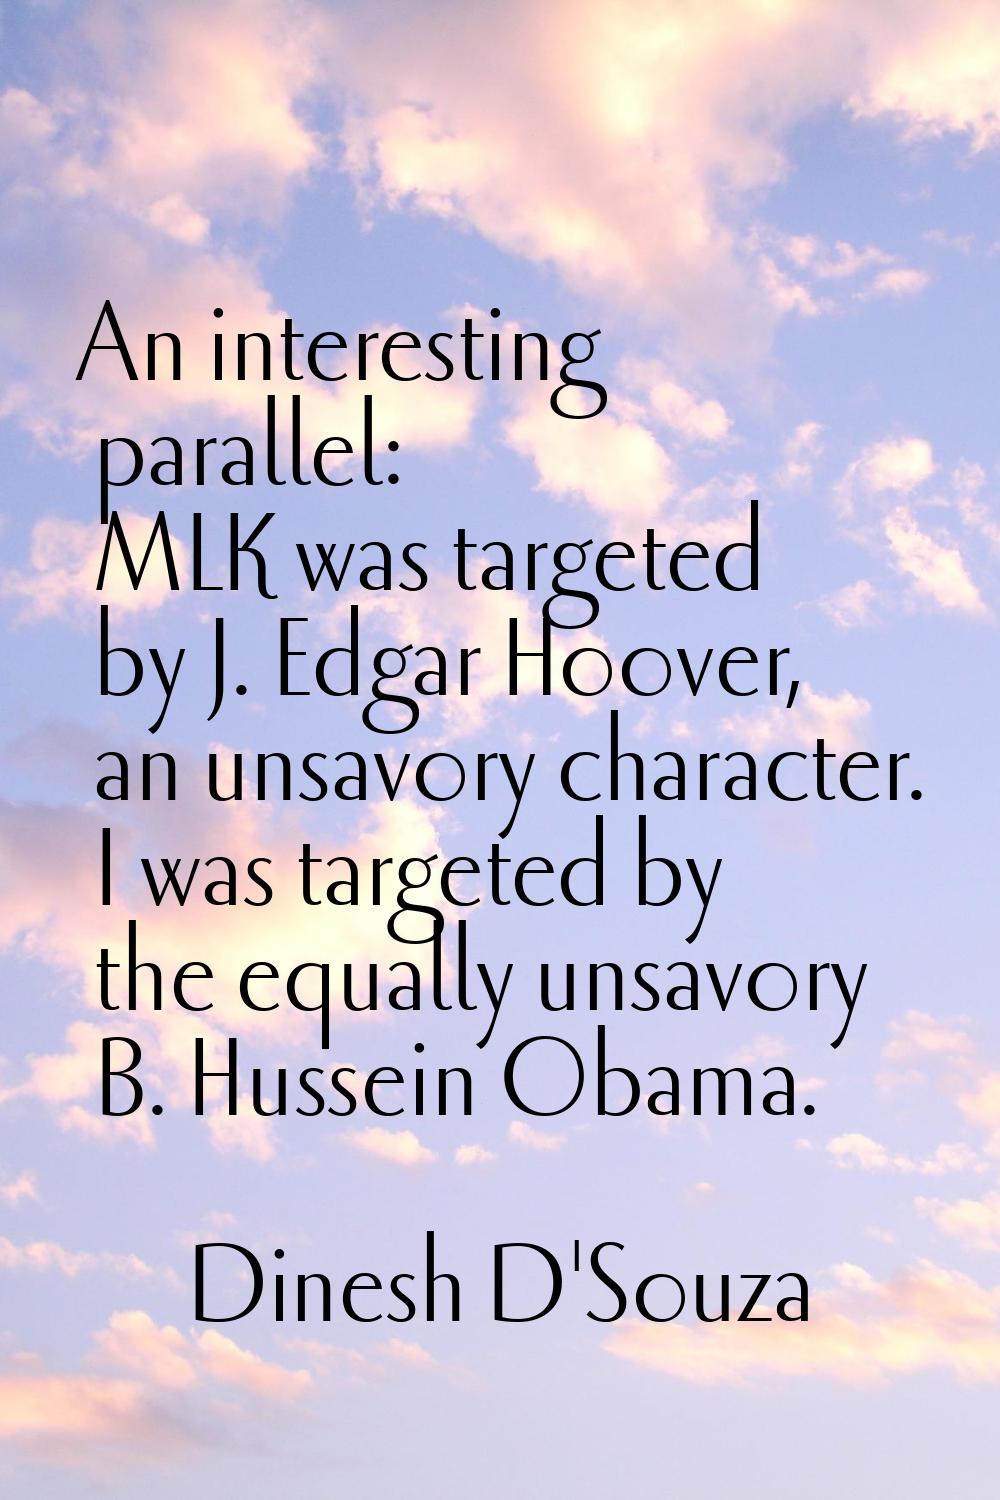 An interesting parallel: MLK was targeted by J. Edgar Hoover, an unsavory character. I was targeted